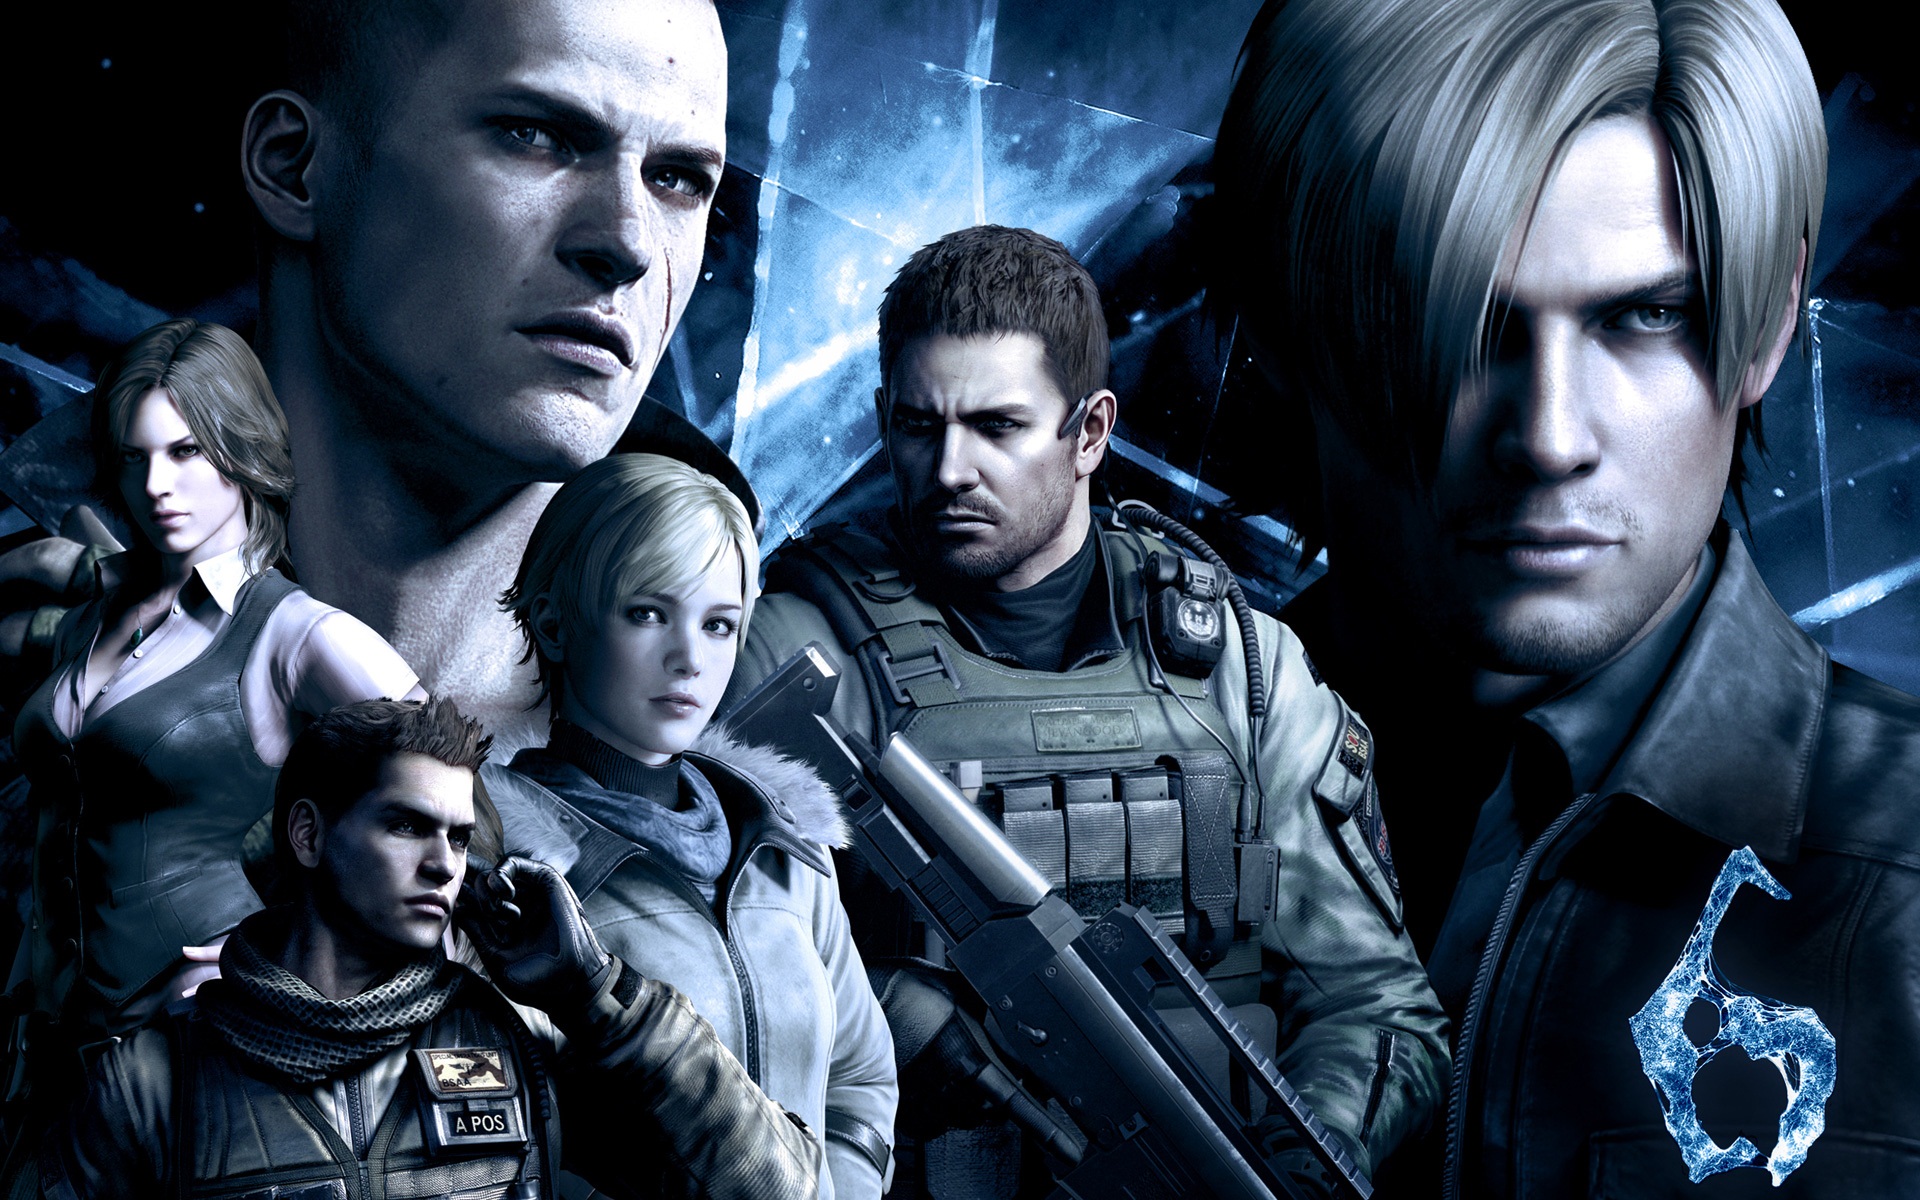 Resident Evil 6 HD game wallpapers #9 - 1920x1200